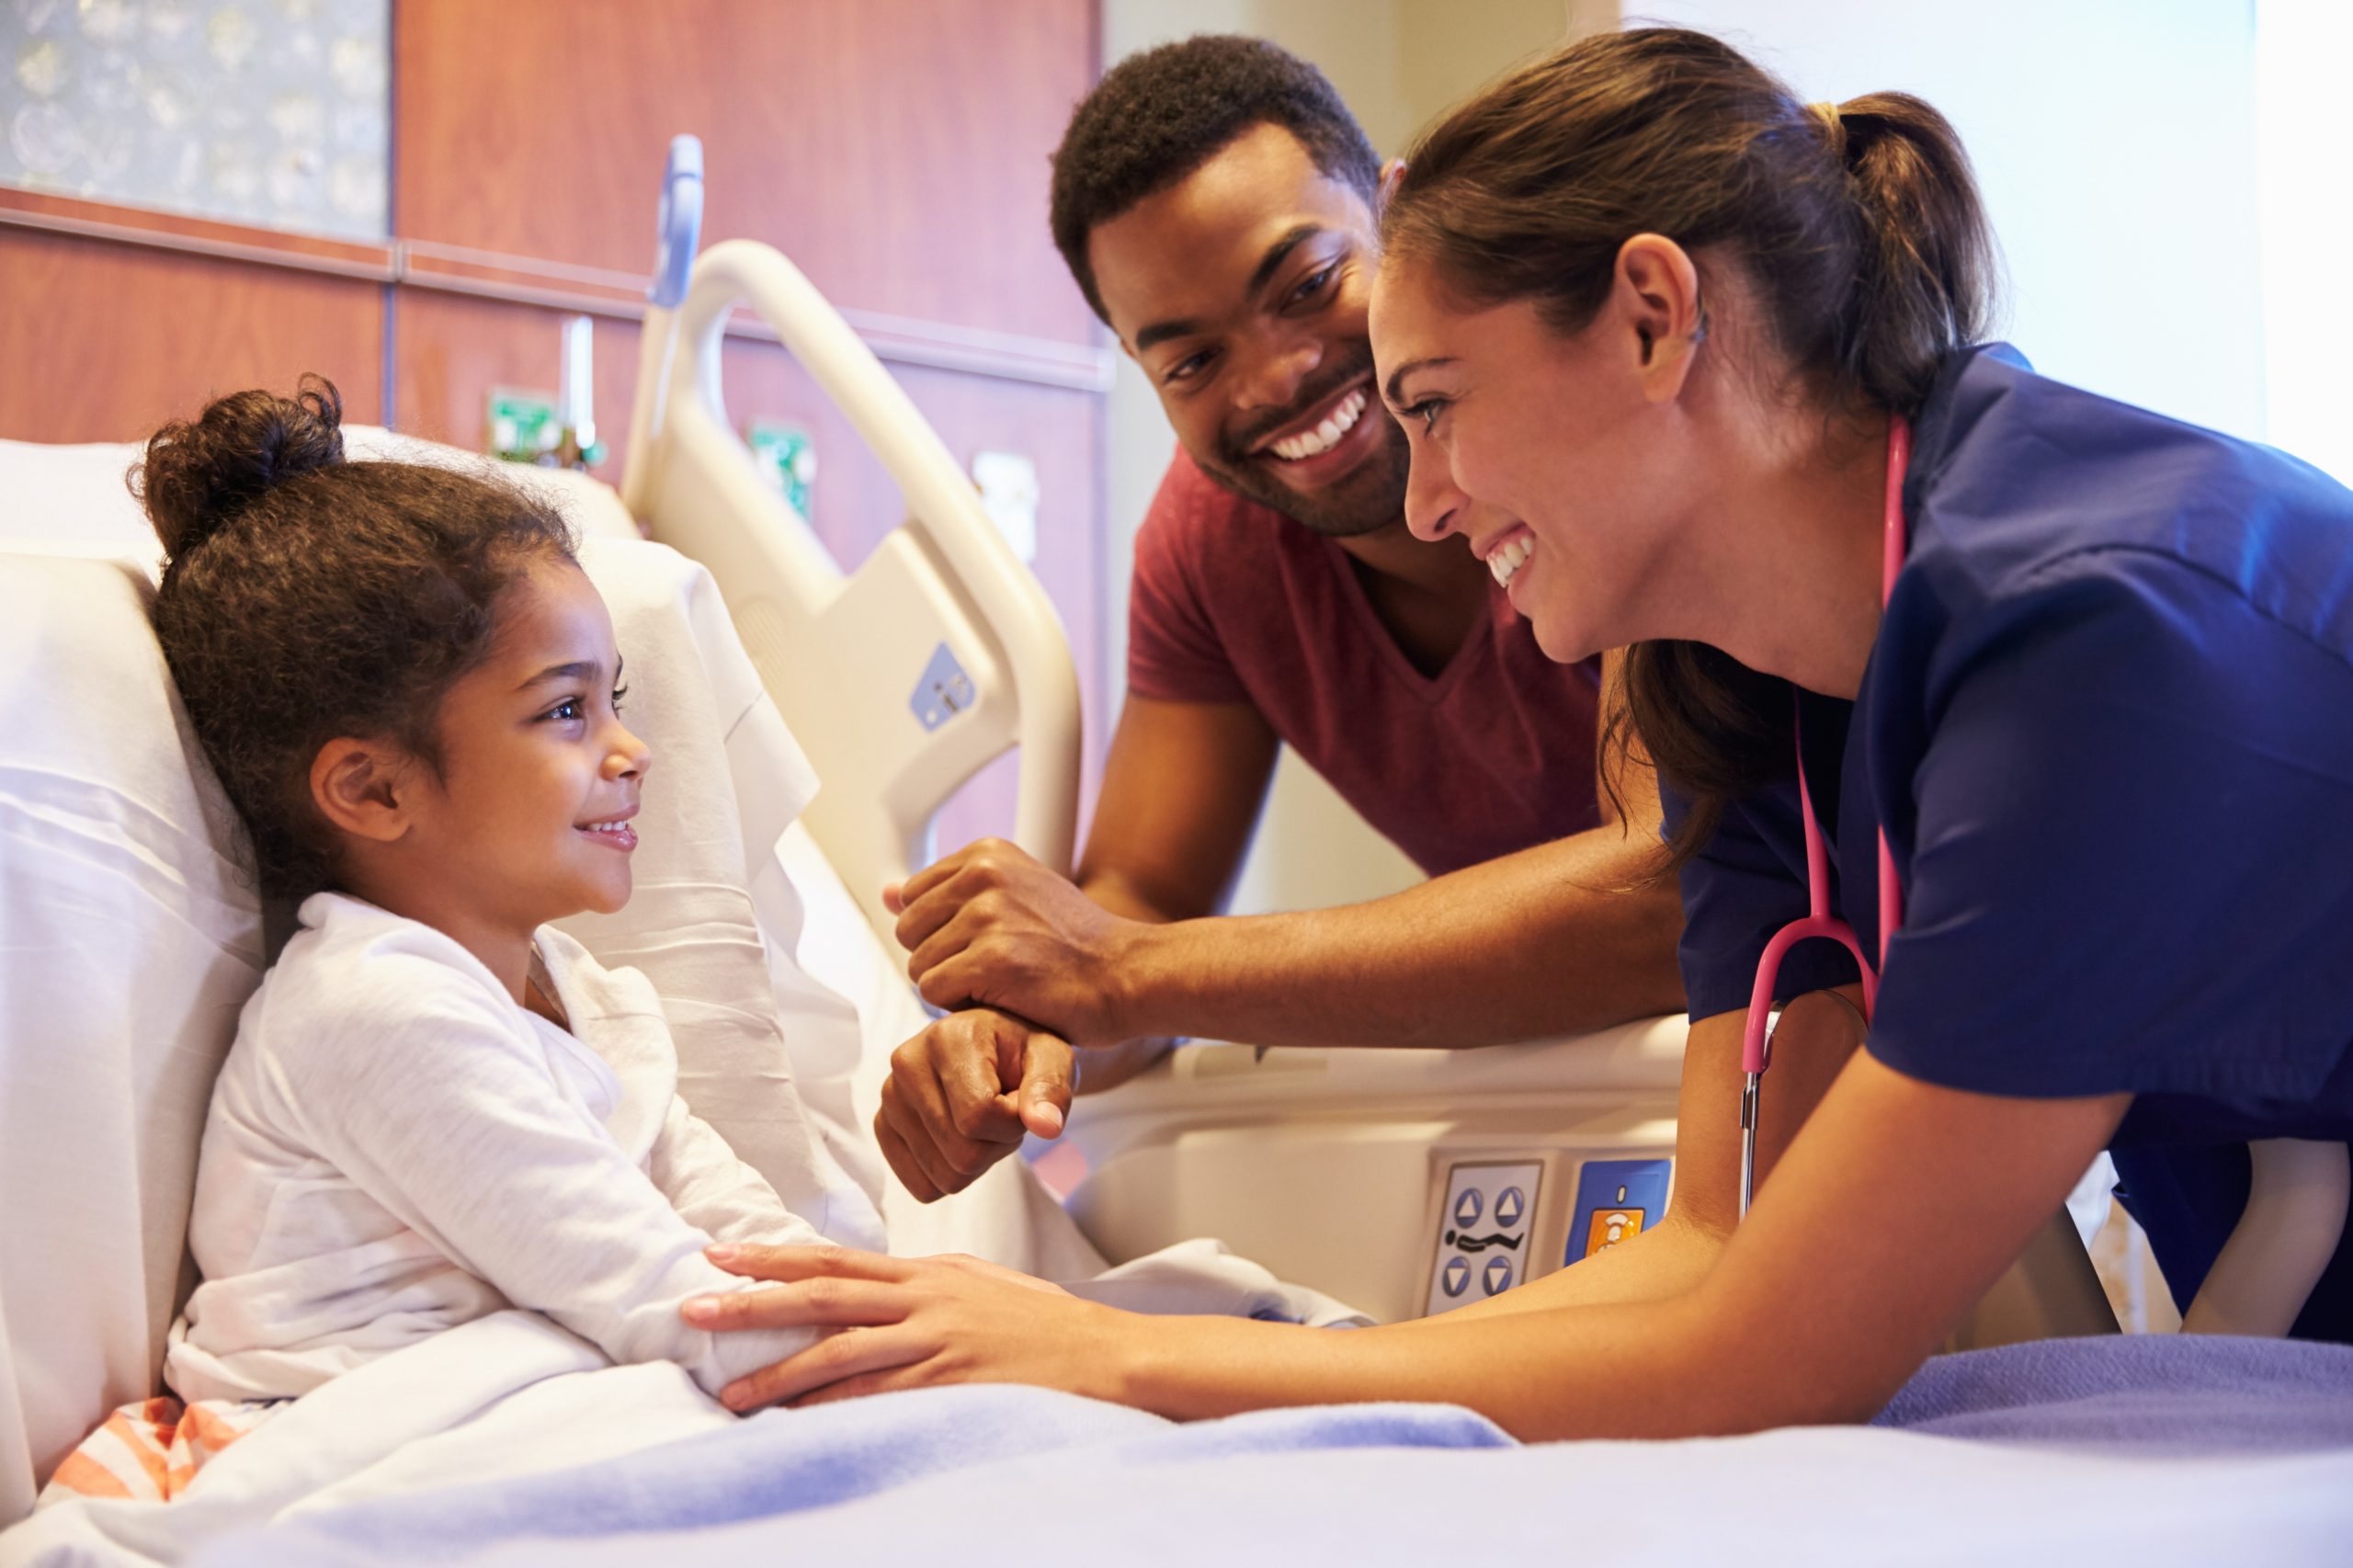 Child who is about to be sedated looks happy while on the bed, surrounded by trusted people.